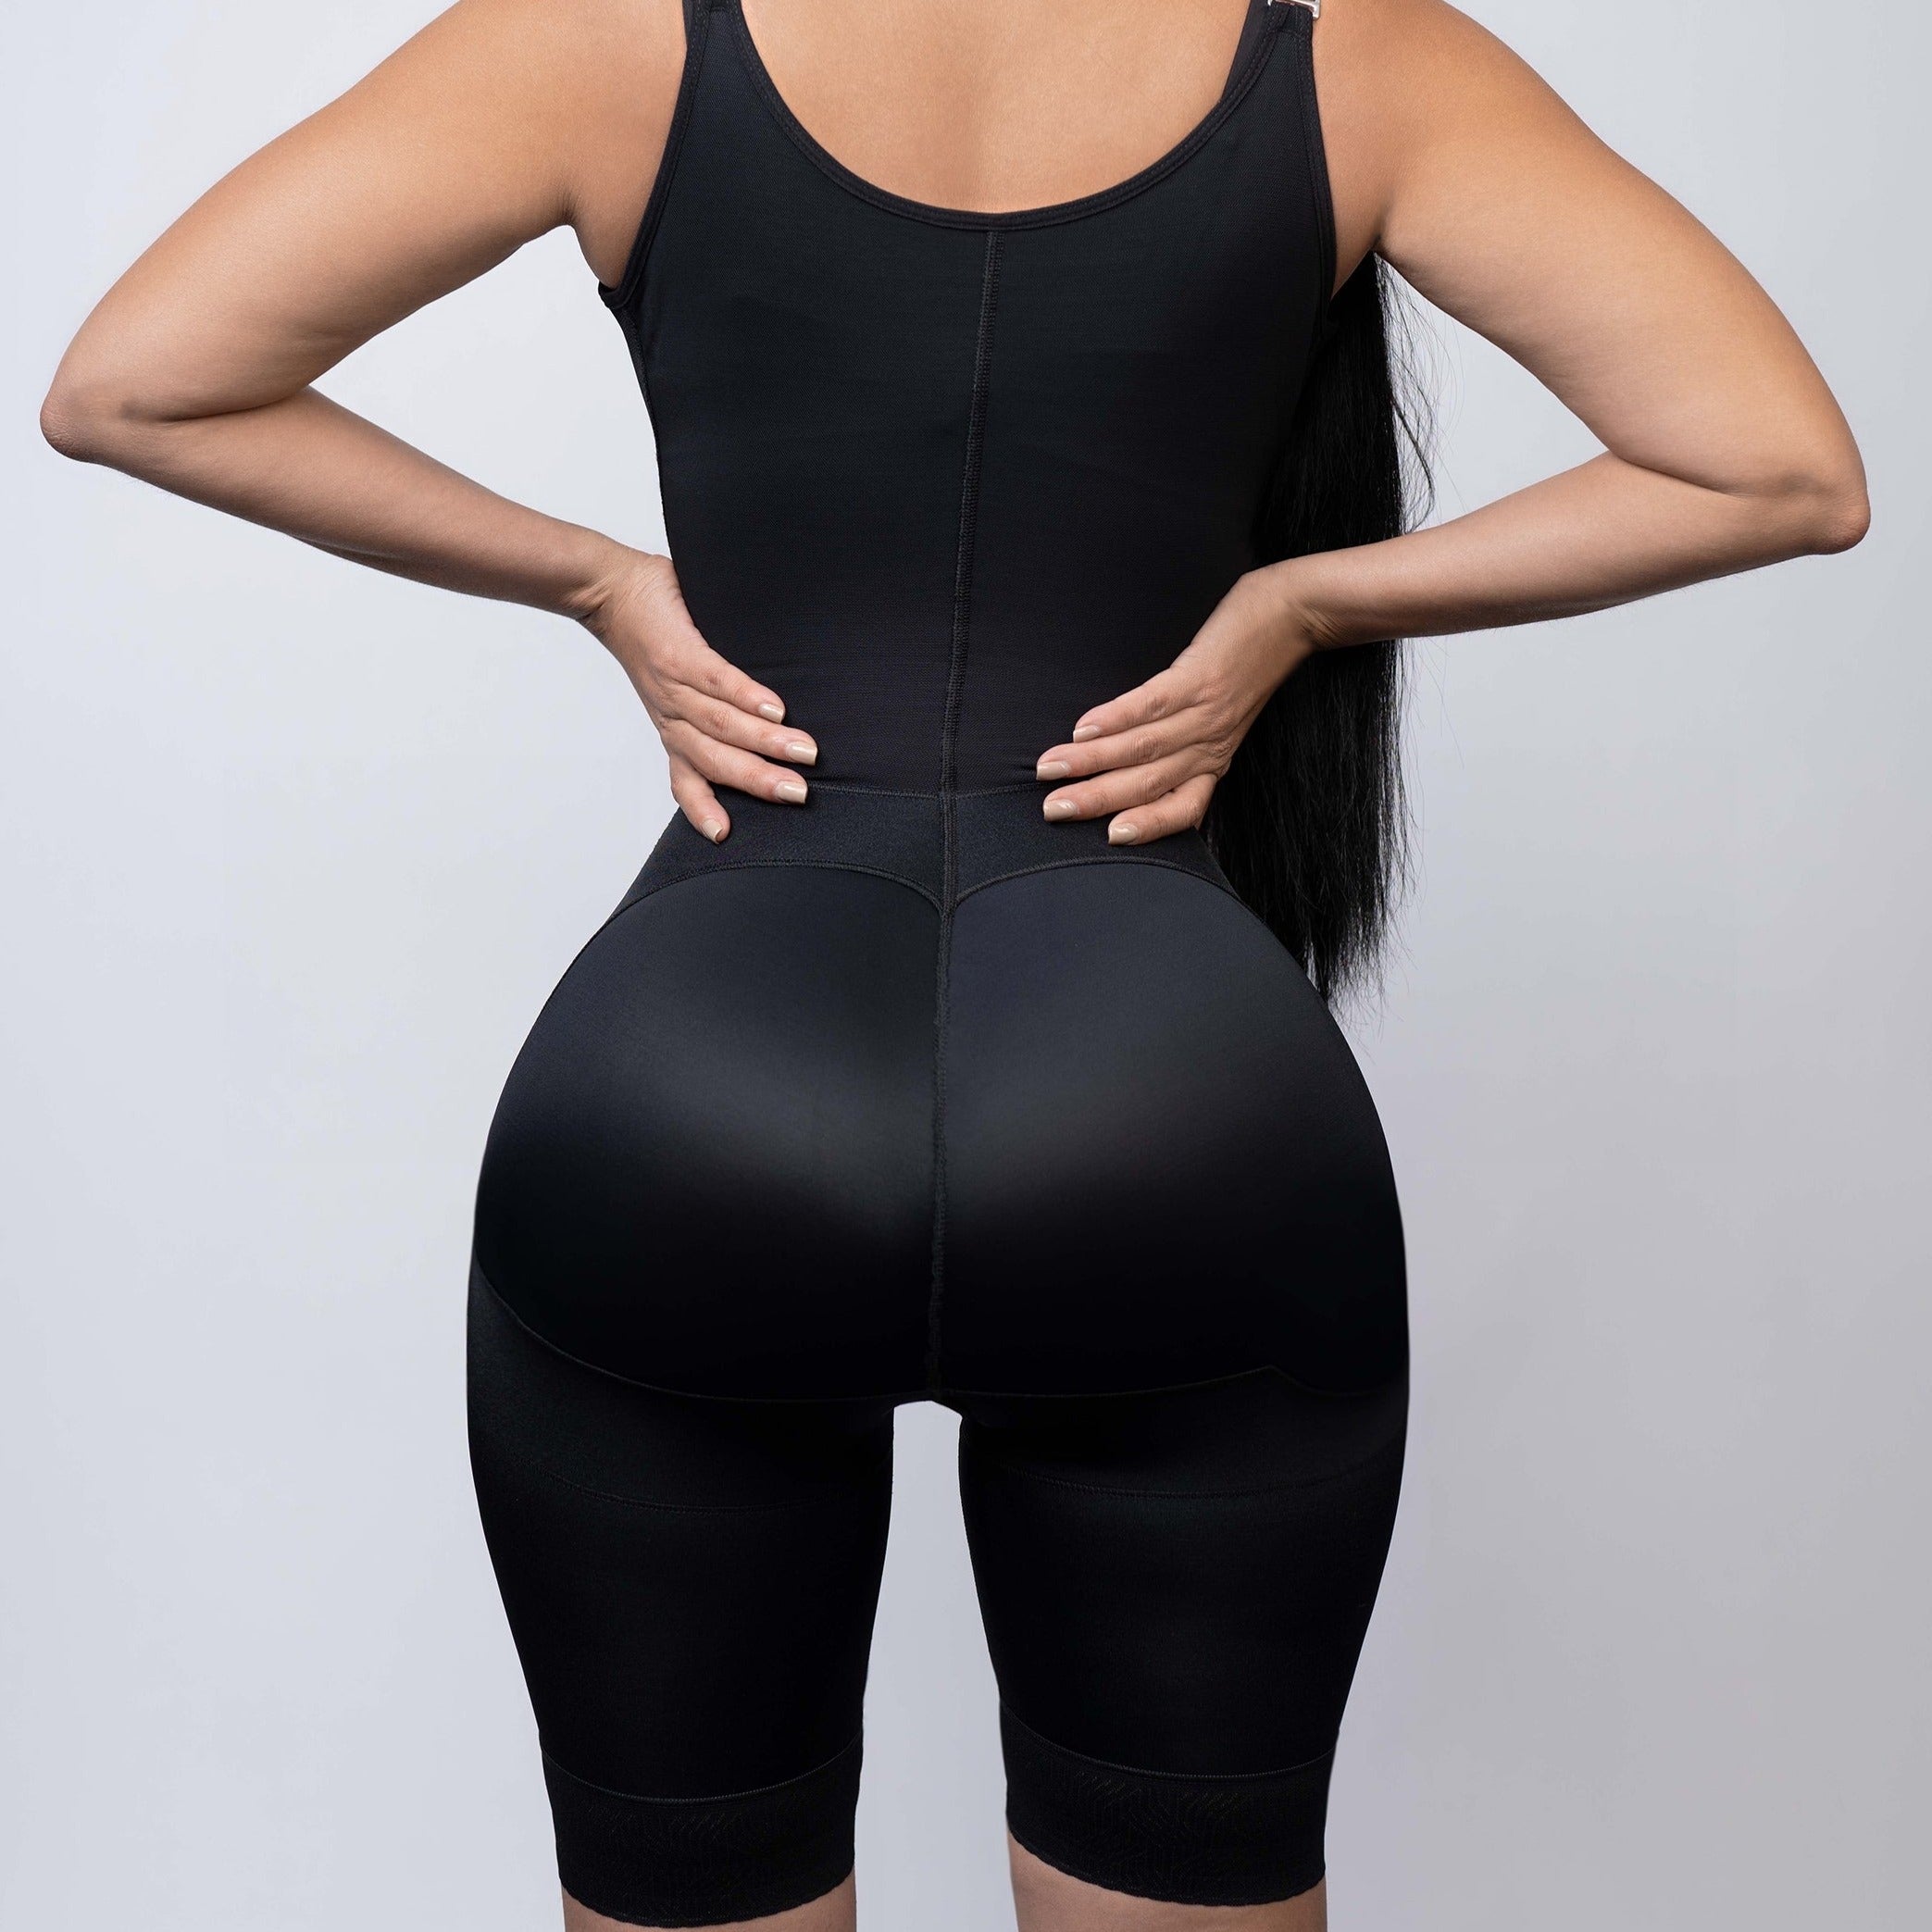 How to Put on Your Ogee Faja – Ogee Recovery